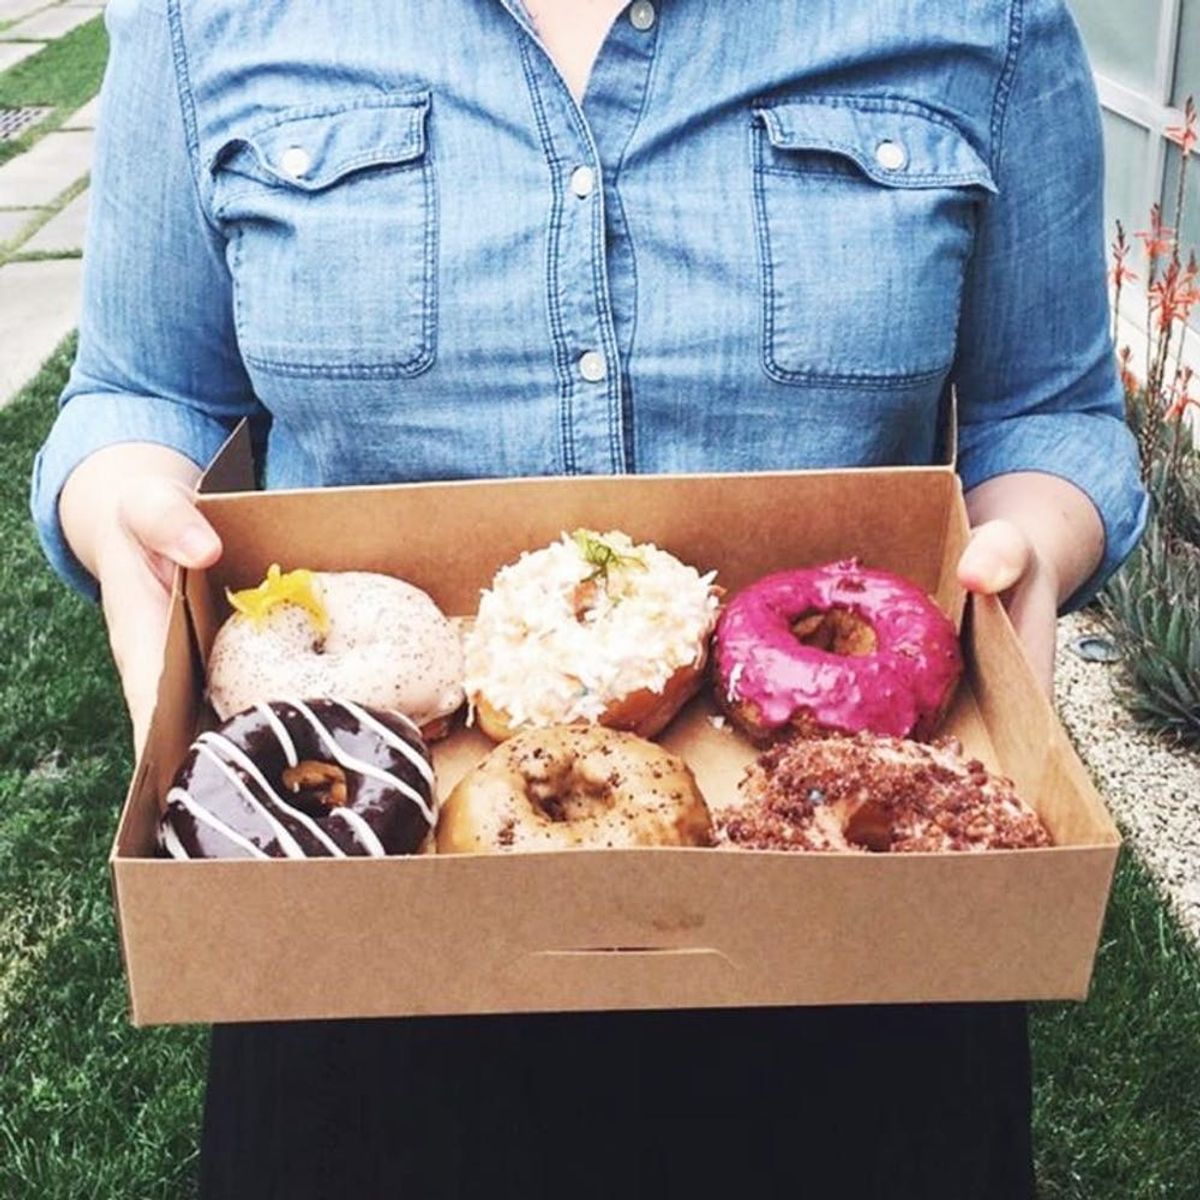 10 Places to Celebrate National Donut Day If You’re Vegan